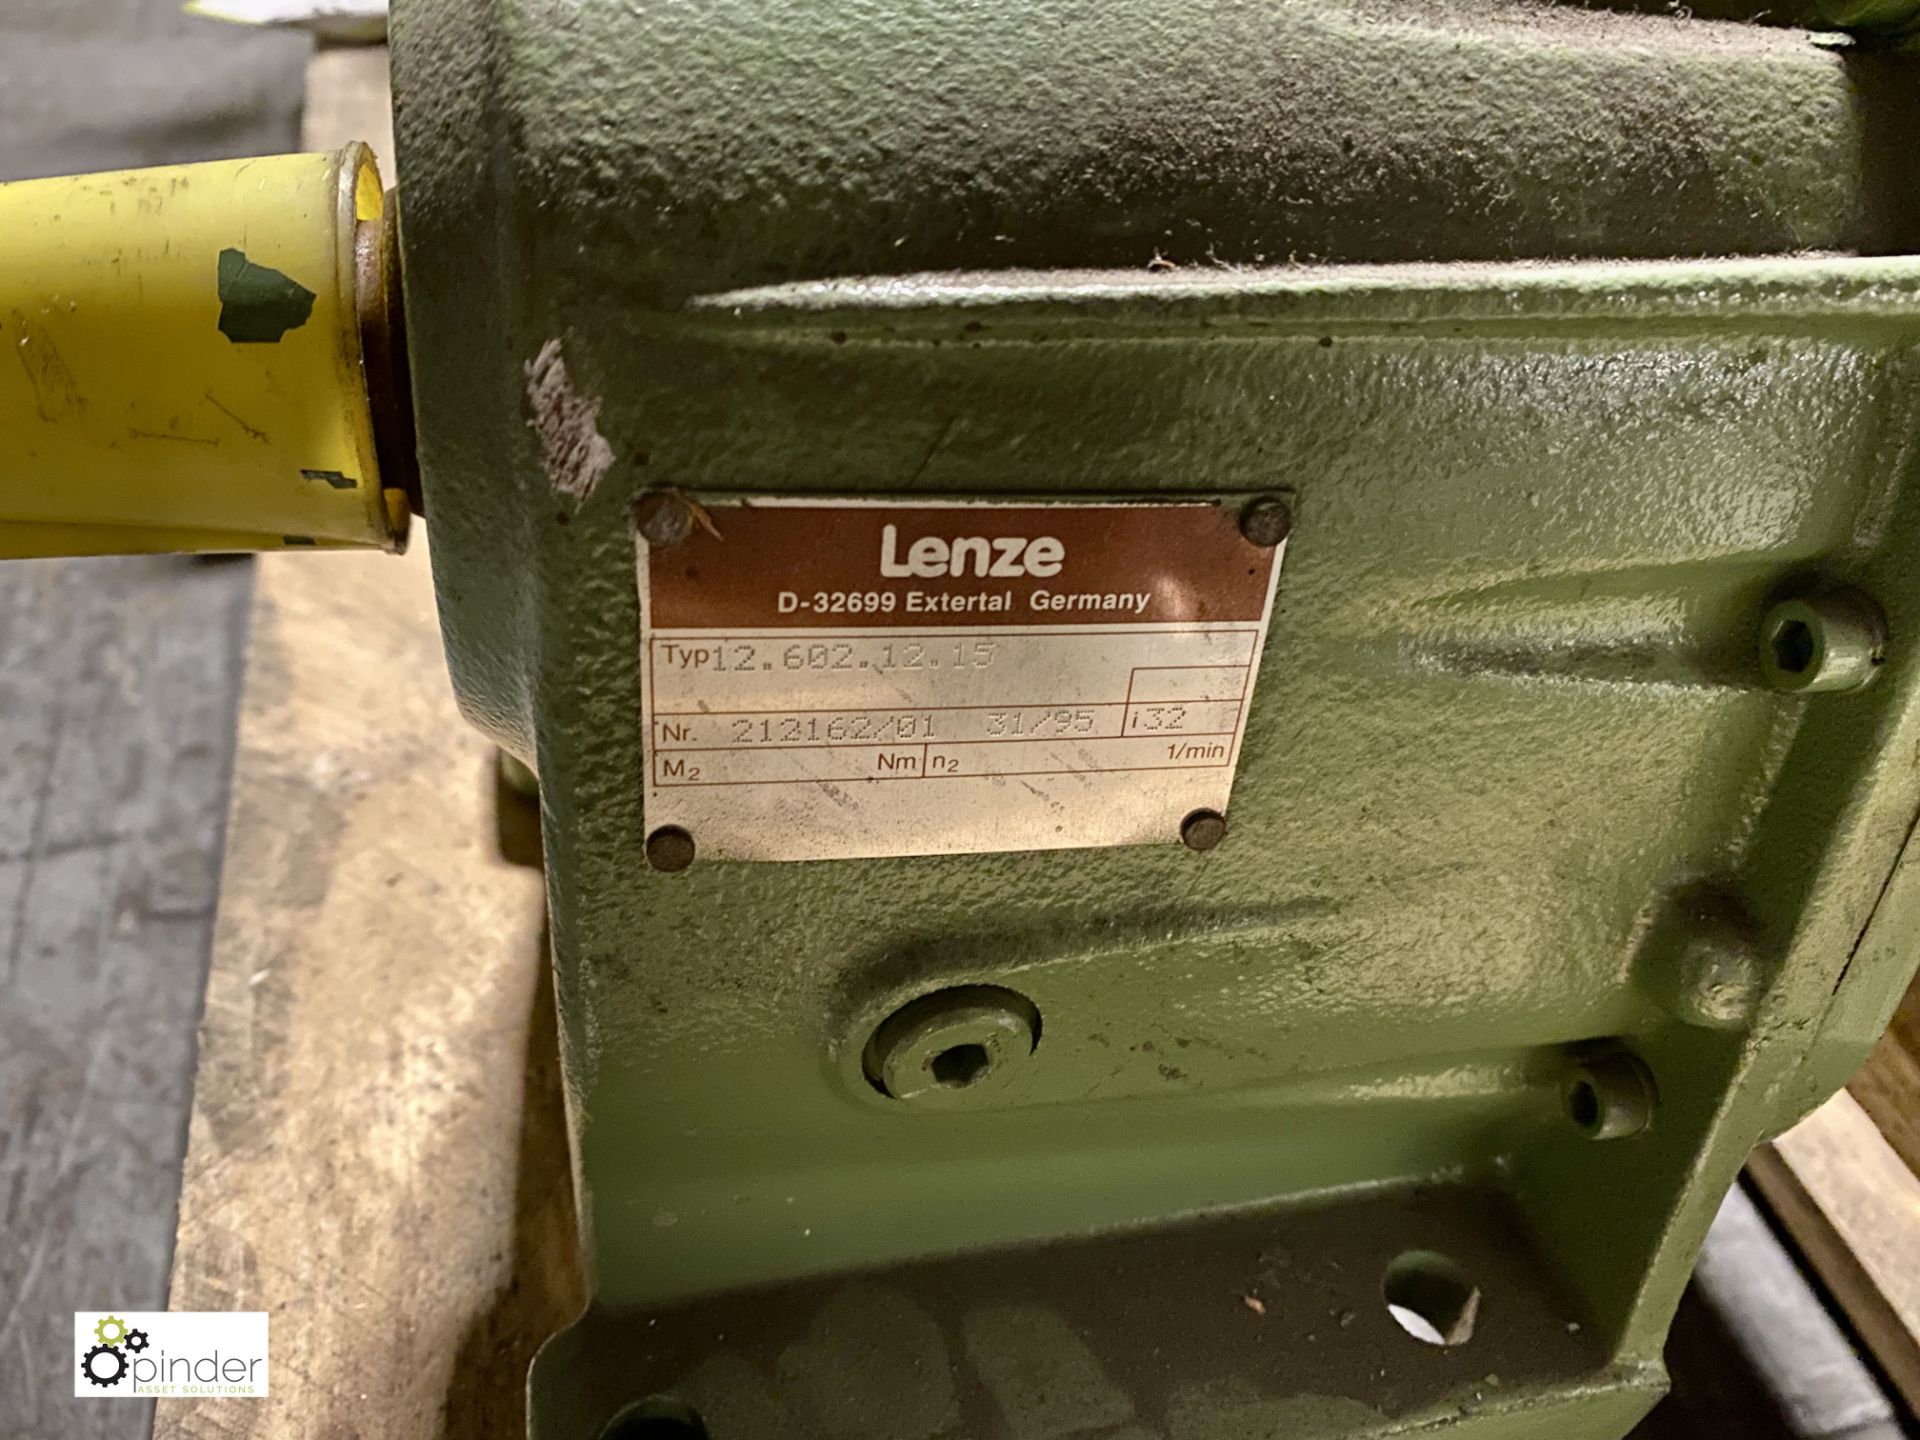 Lenze 12.602.12.15 Electric Geared Motor, 0.75kw, - Image 3 of 4